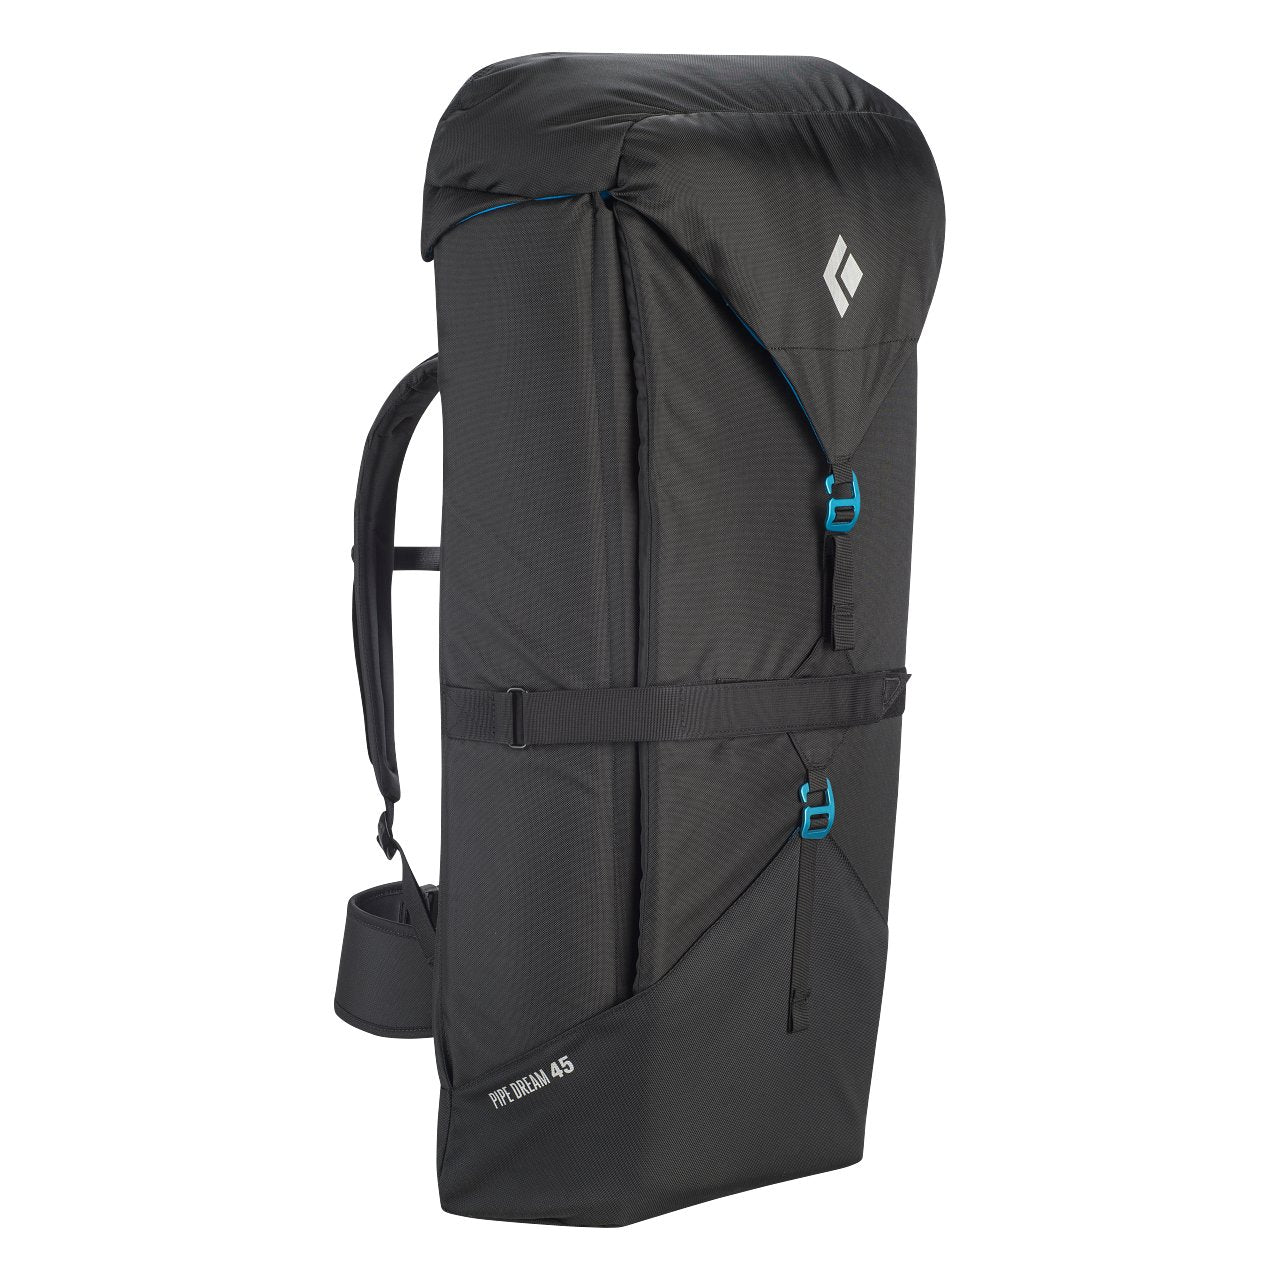 Pipe Dream (45L), climbing backpack